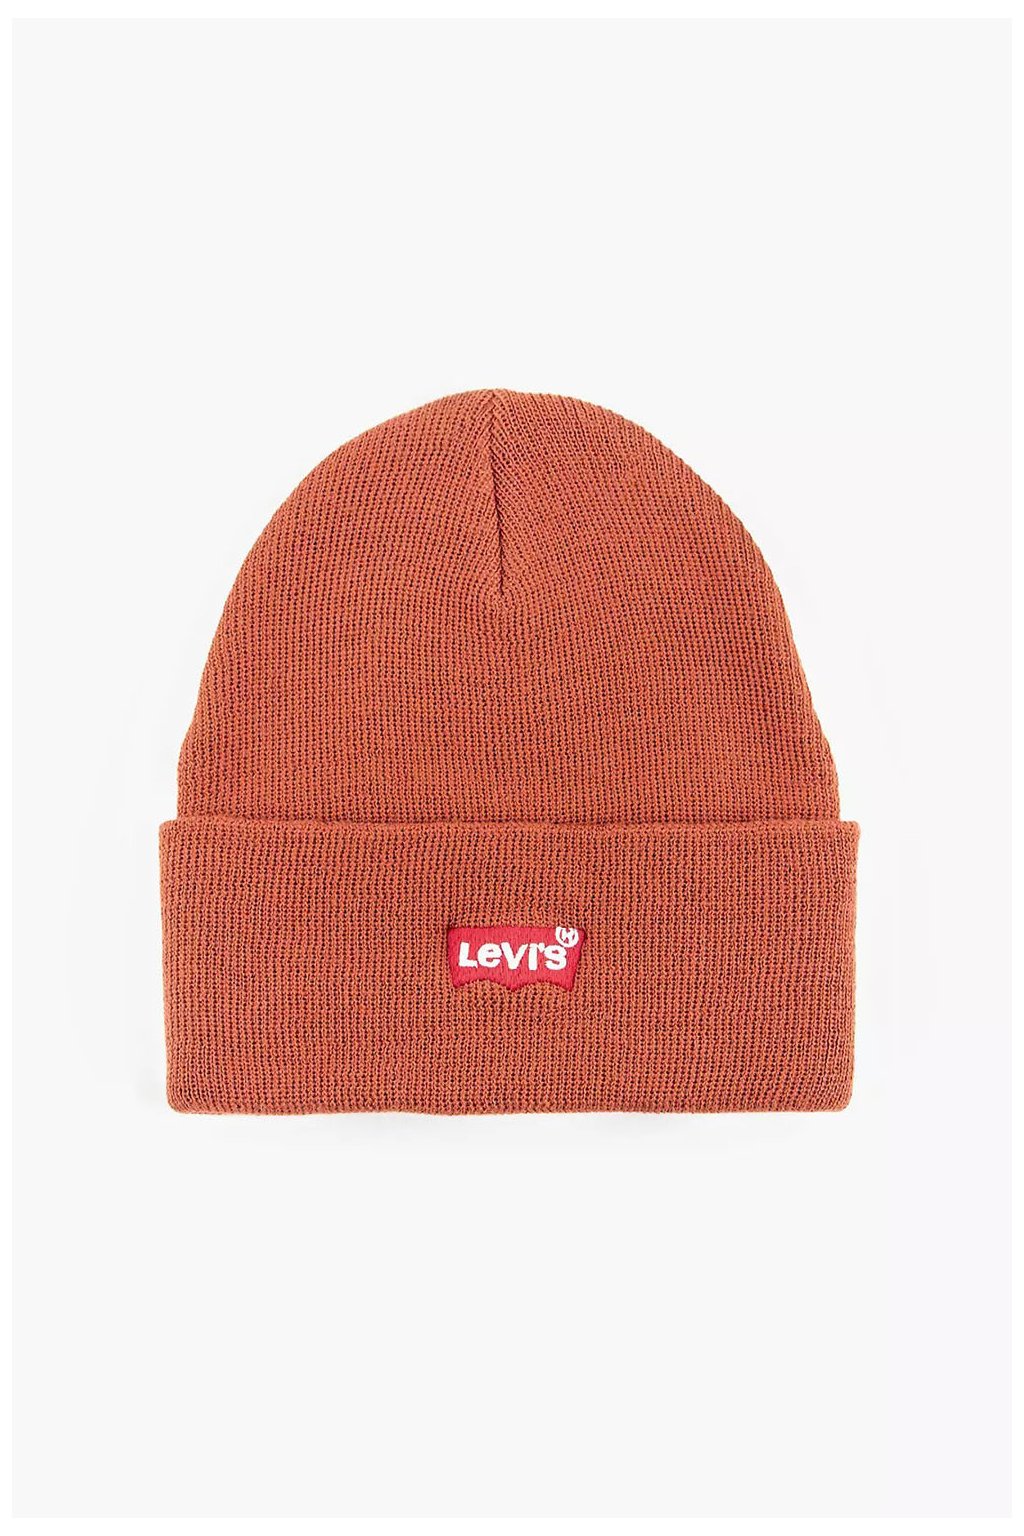 Čiapka LEVI'S® Knitted hads red 771380892 Embroidered Slouchy Beanie D5453-0007